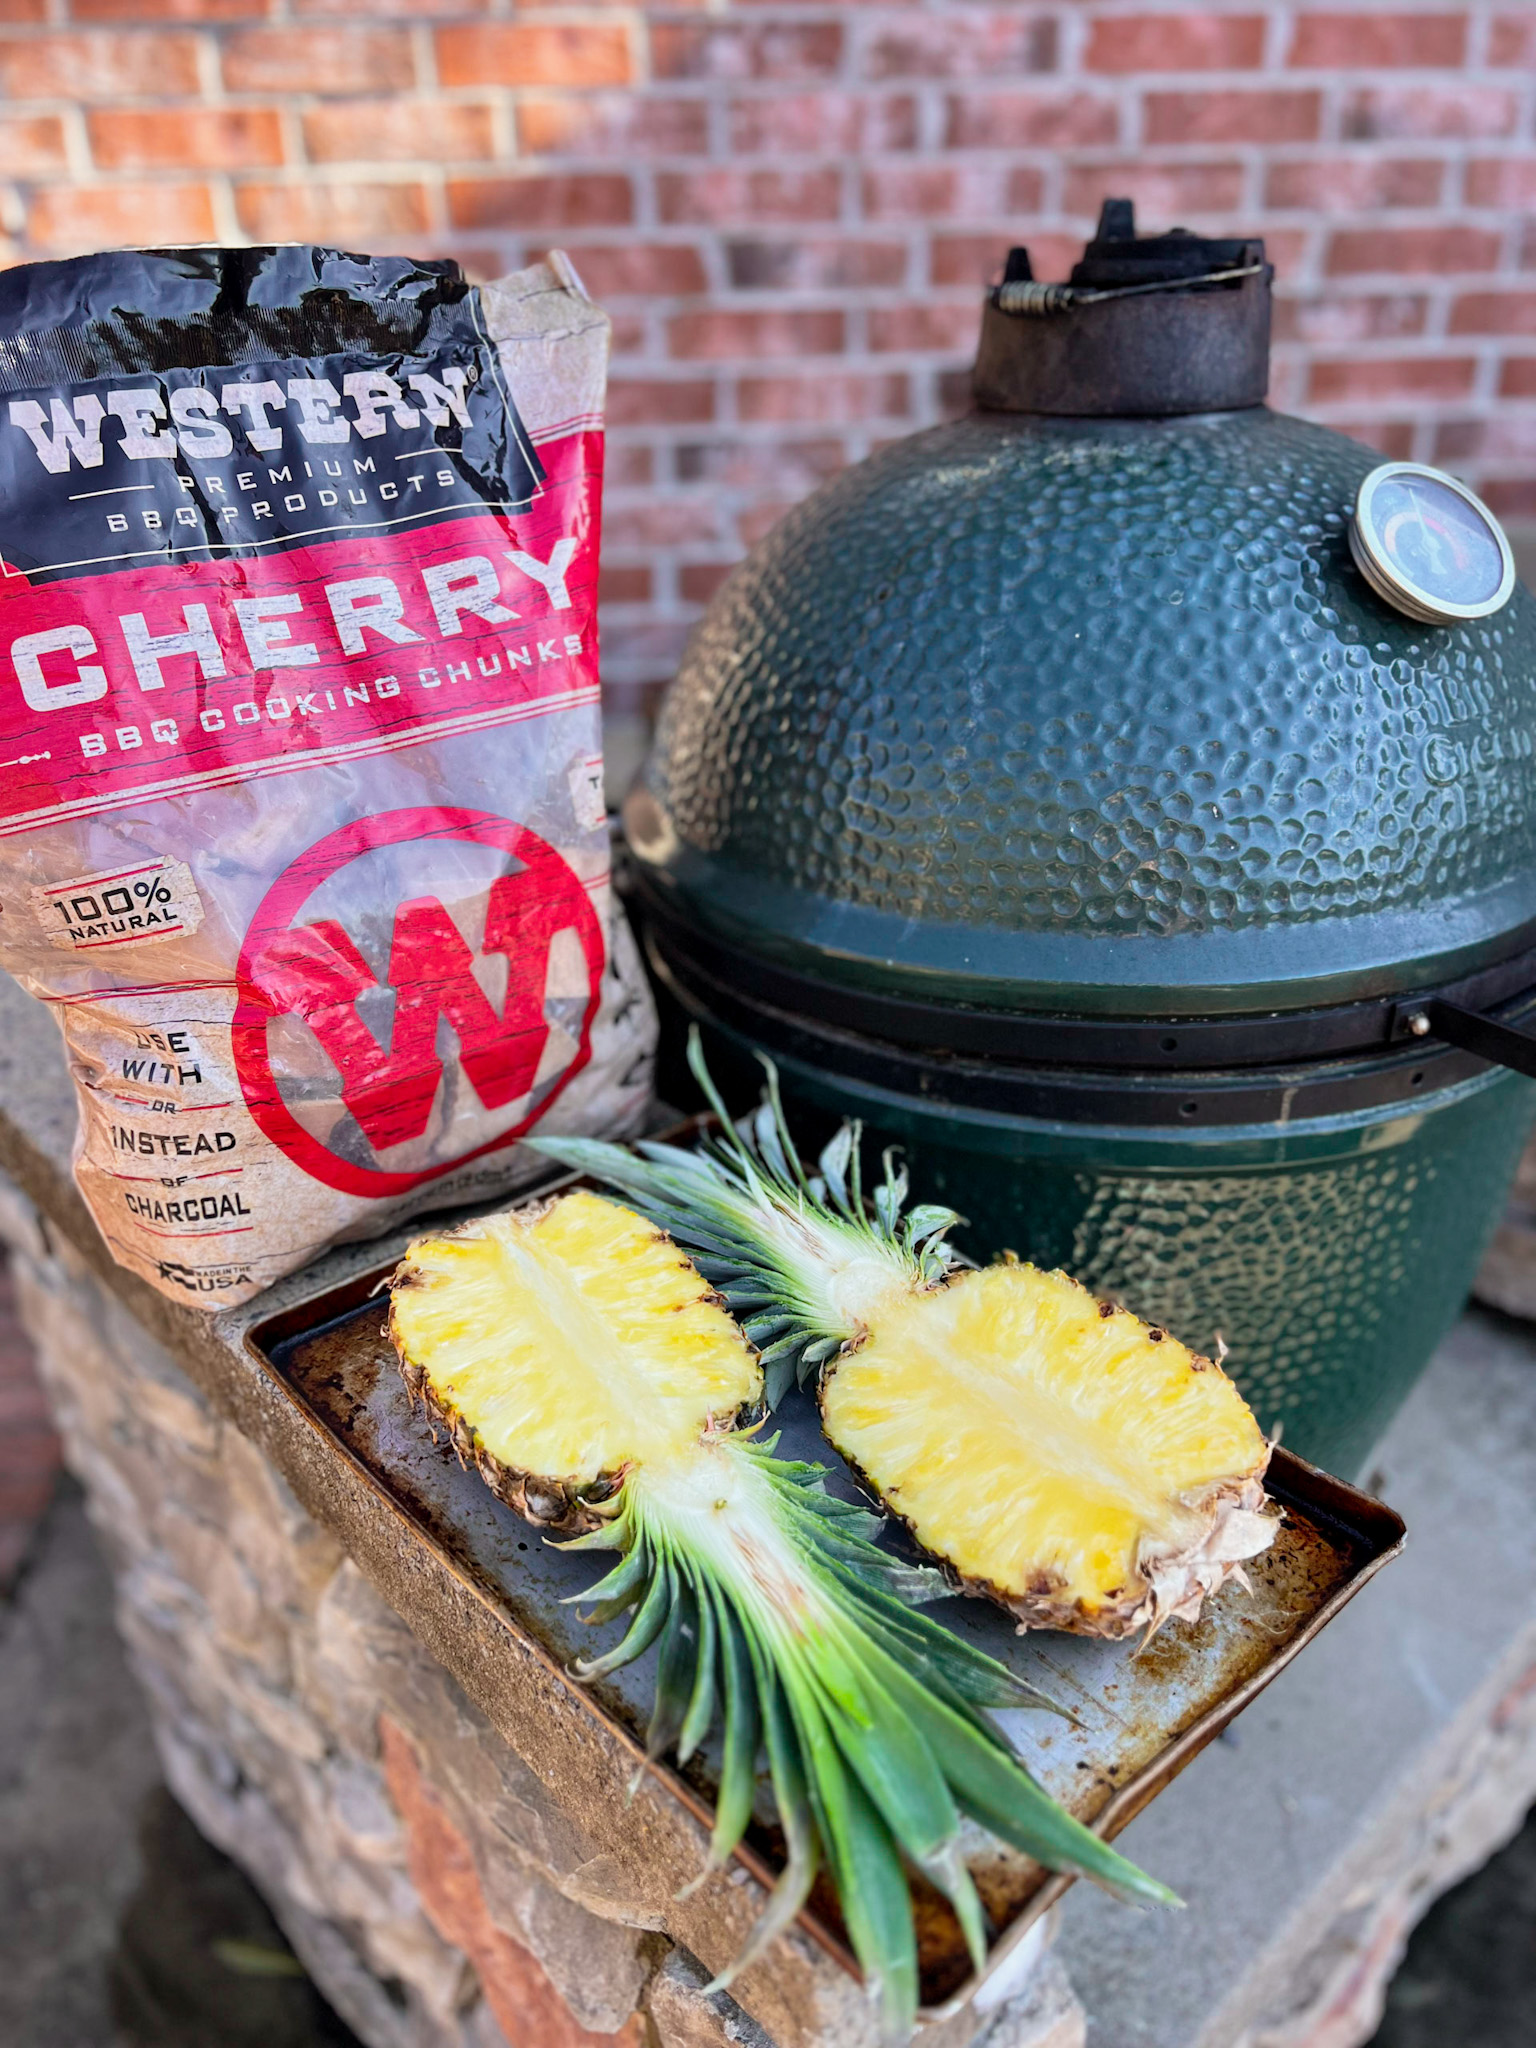 wetern wood bbq cherry wood chunks in a bag and a whole pineapple cut in half sitting next to a big green egg smoker